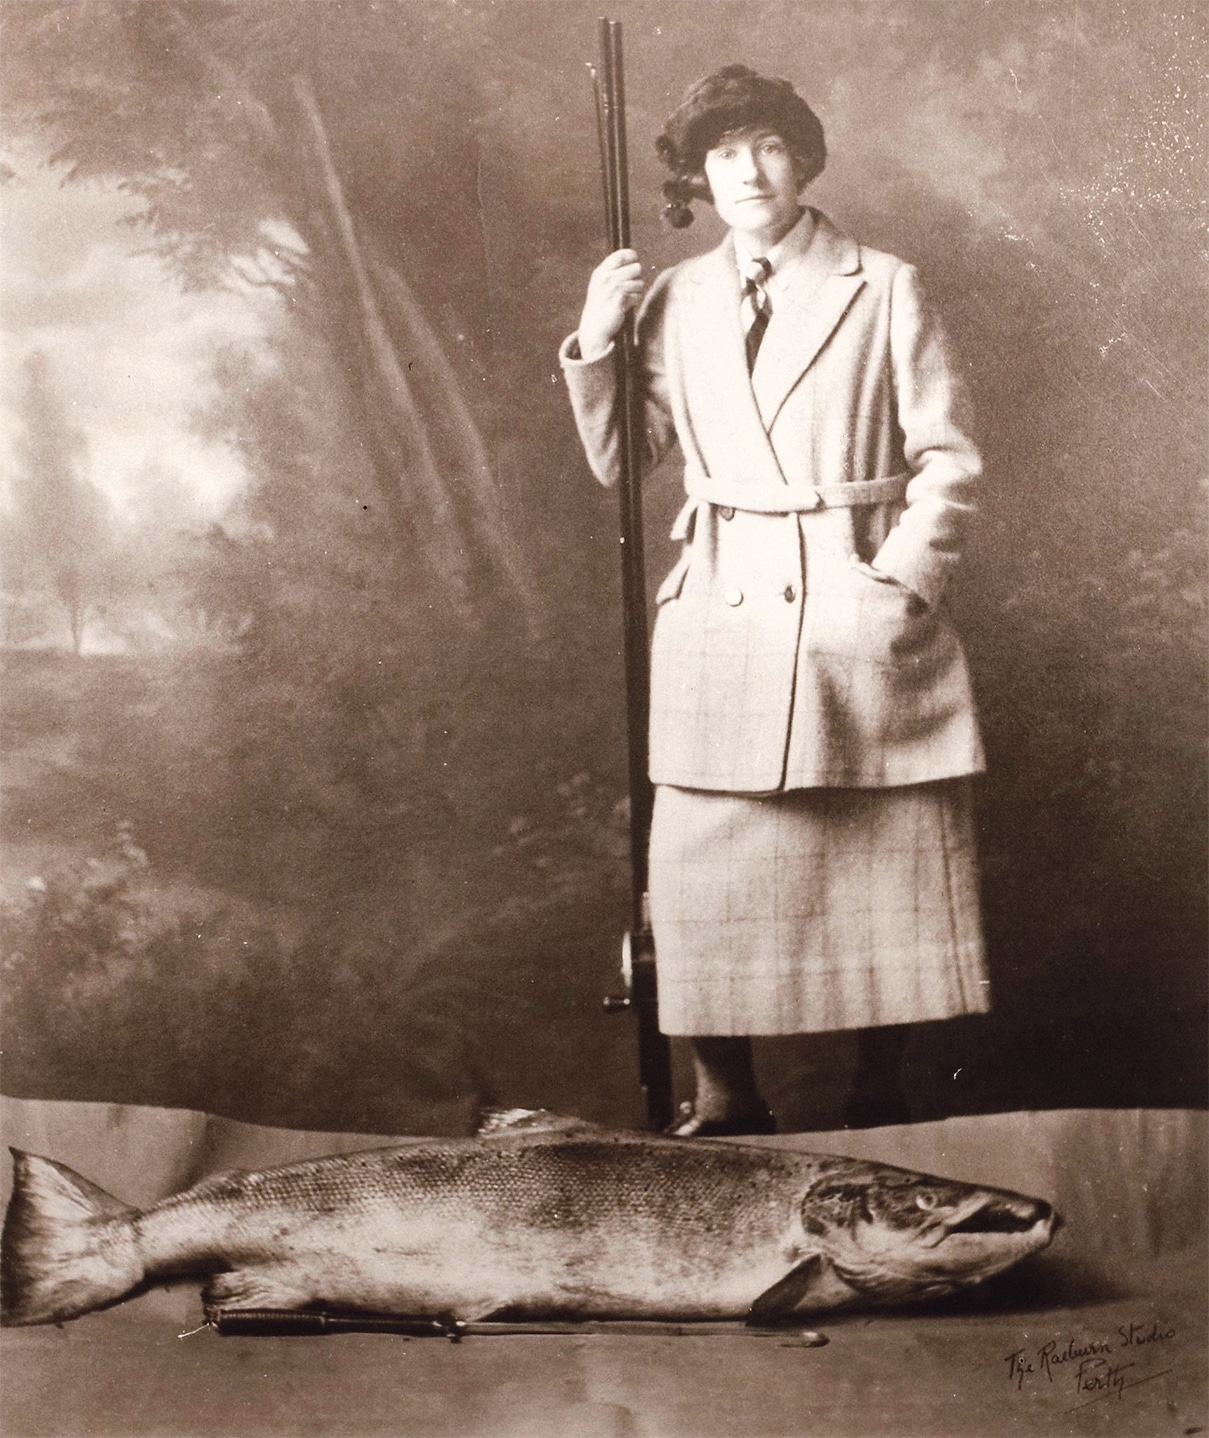 Centenary of the greatest ever fishing catch….landed by a 5ft nurse